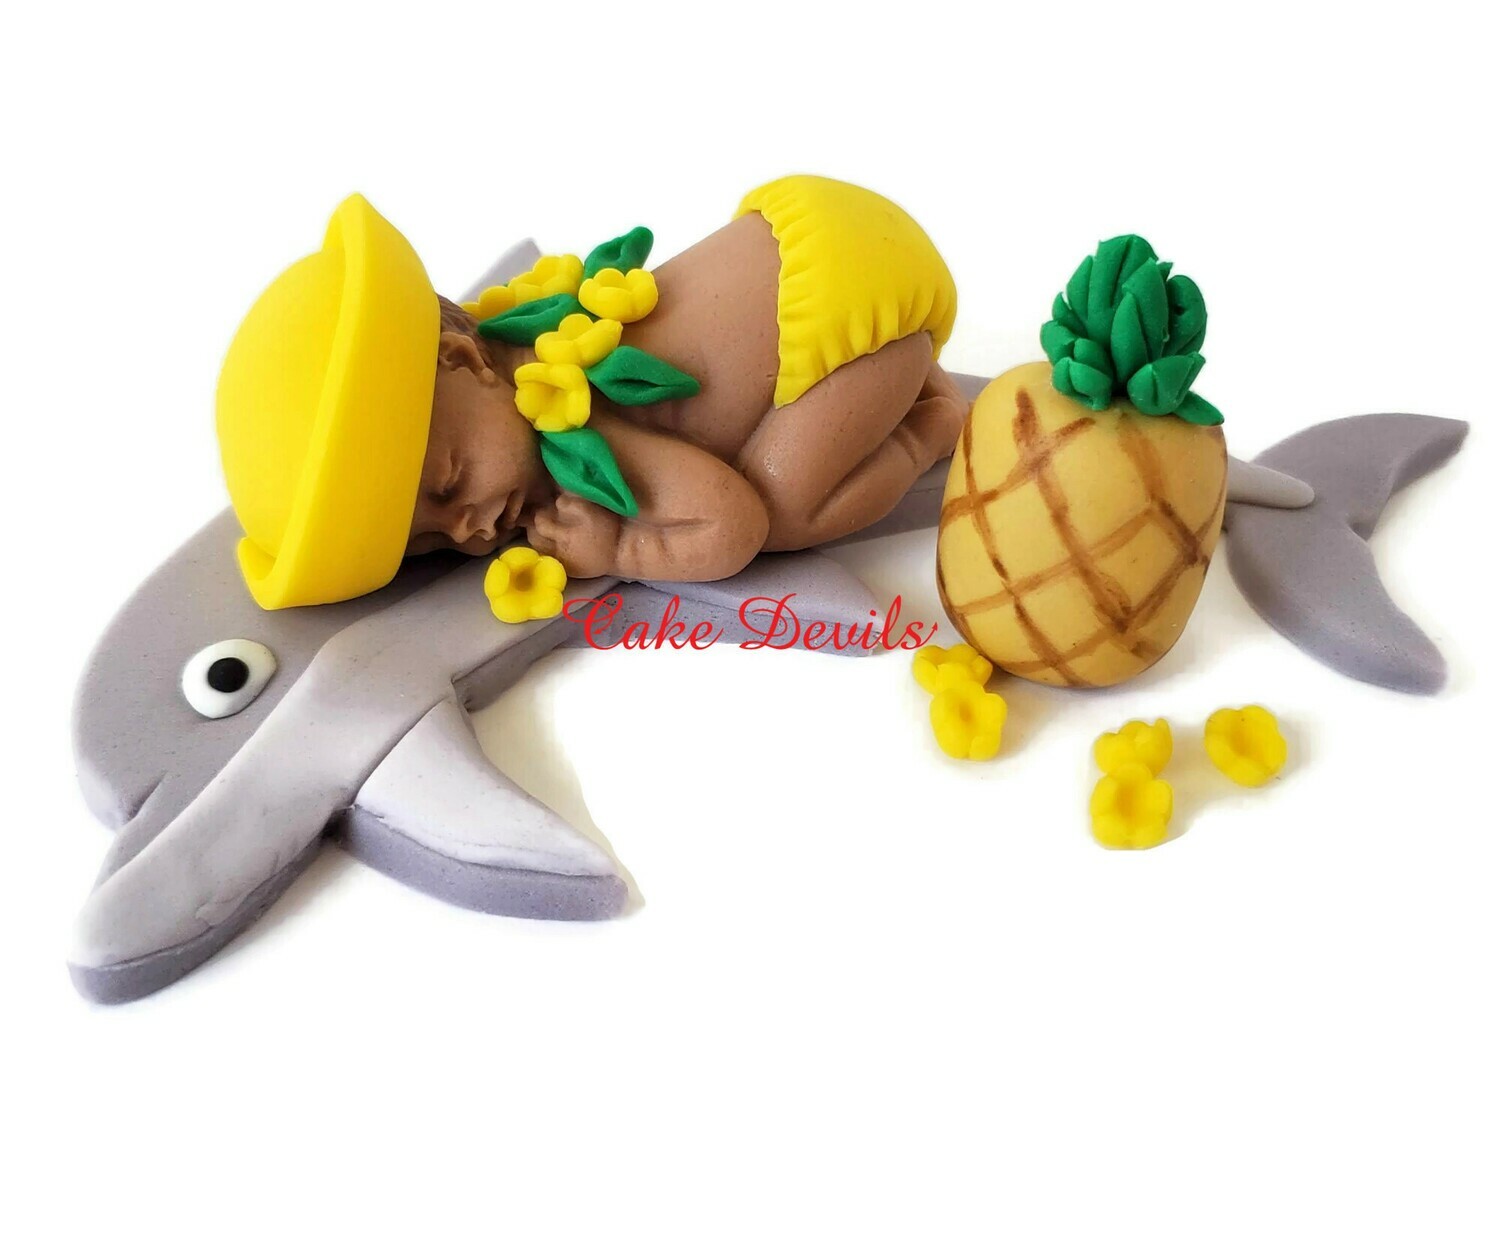 Fondant Dolphin Baby Cake Topper, Great for a Tropical Hawaiian Luau Baby Shower Cake